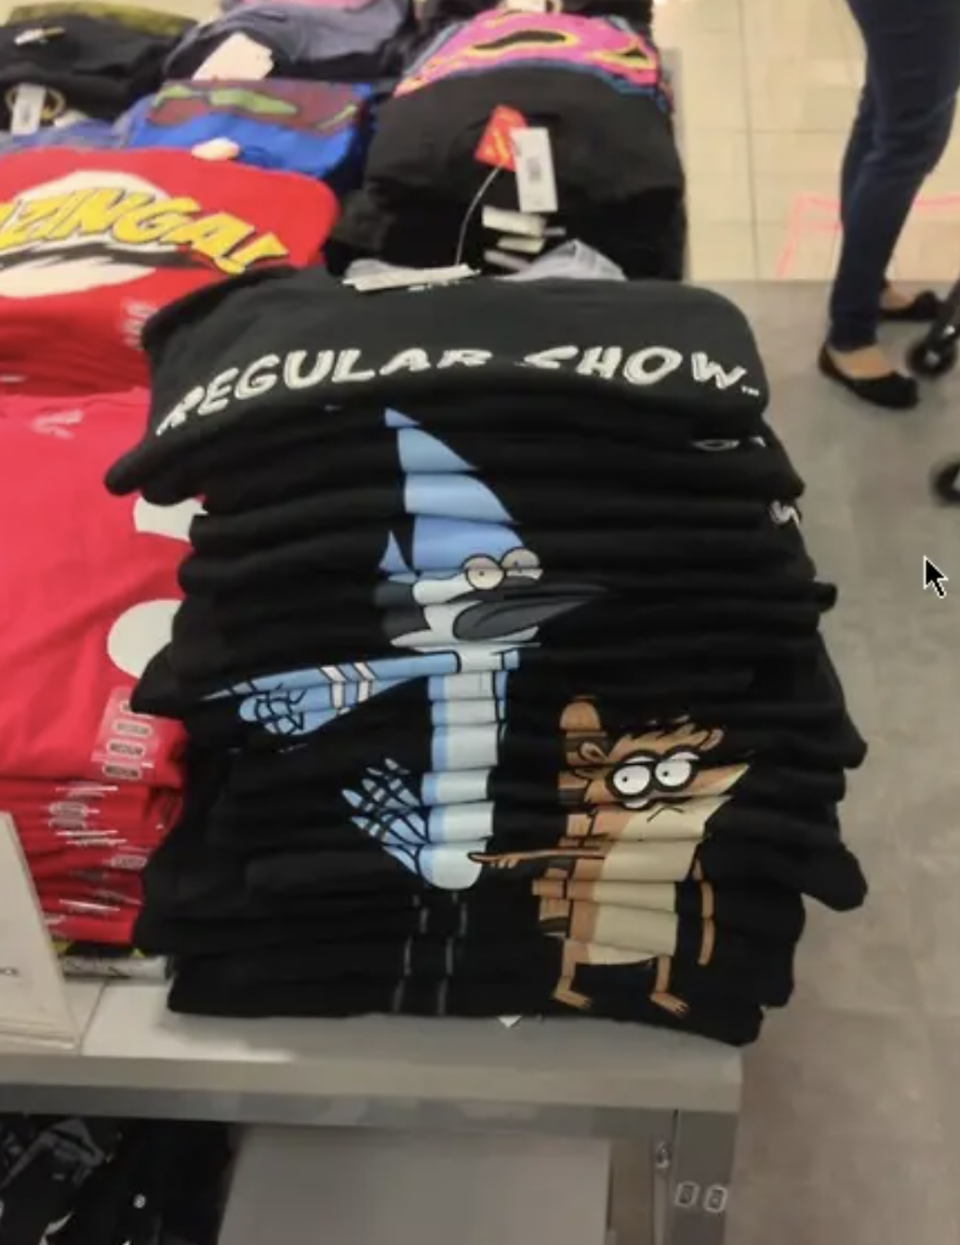 Stack of 'Regular Show' t-shirts featuring characters Mordecai and Rigby